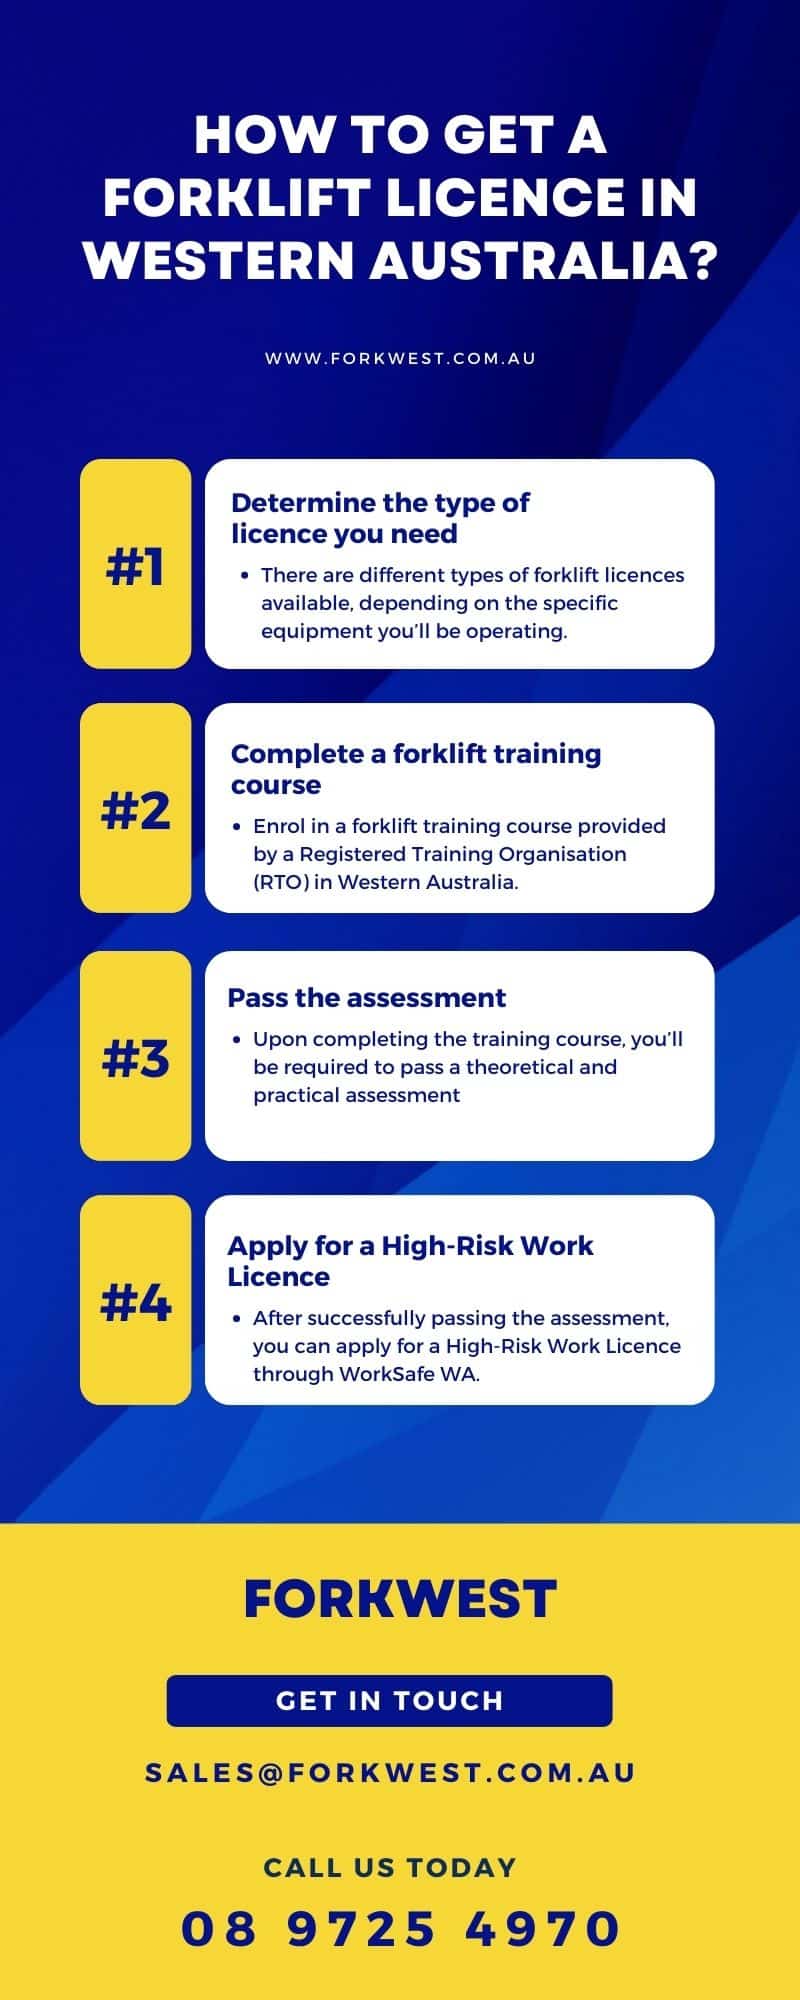 Infographic depicting the steps and requirements to obtain a forklift licence in Western Australia, providing a visual guide for the licensing process